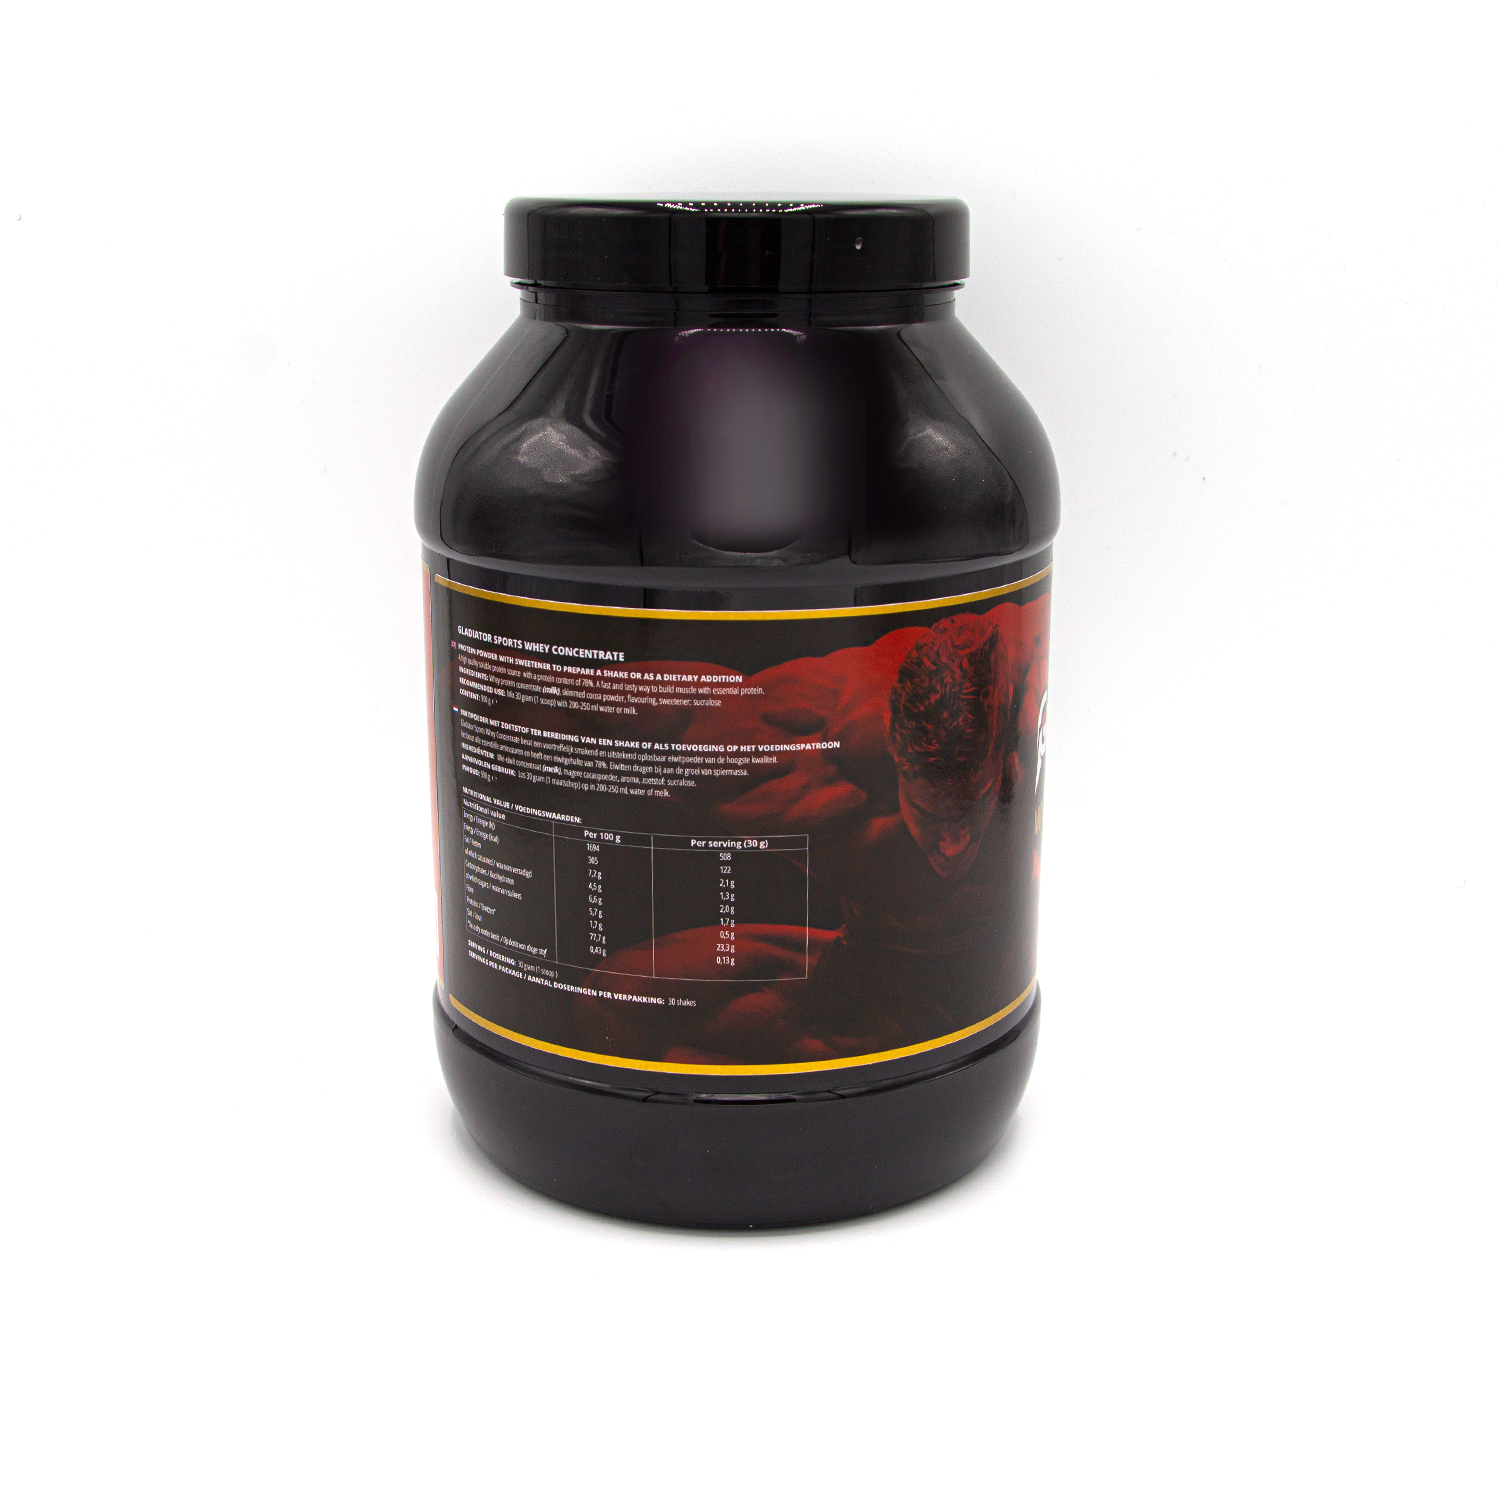 Gladiator Sports Whey Proteïne Concentraat